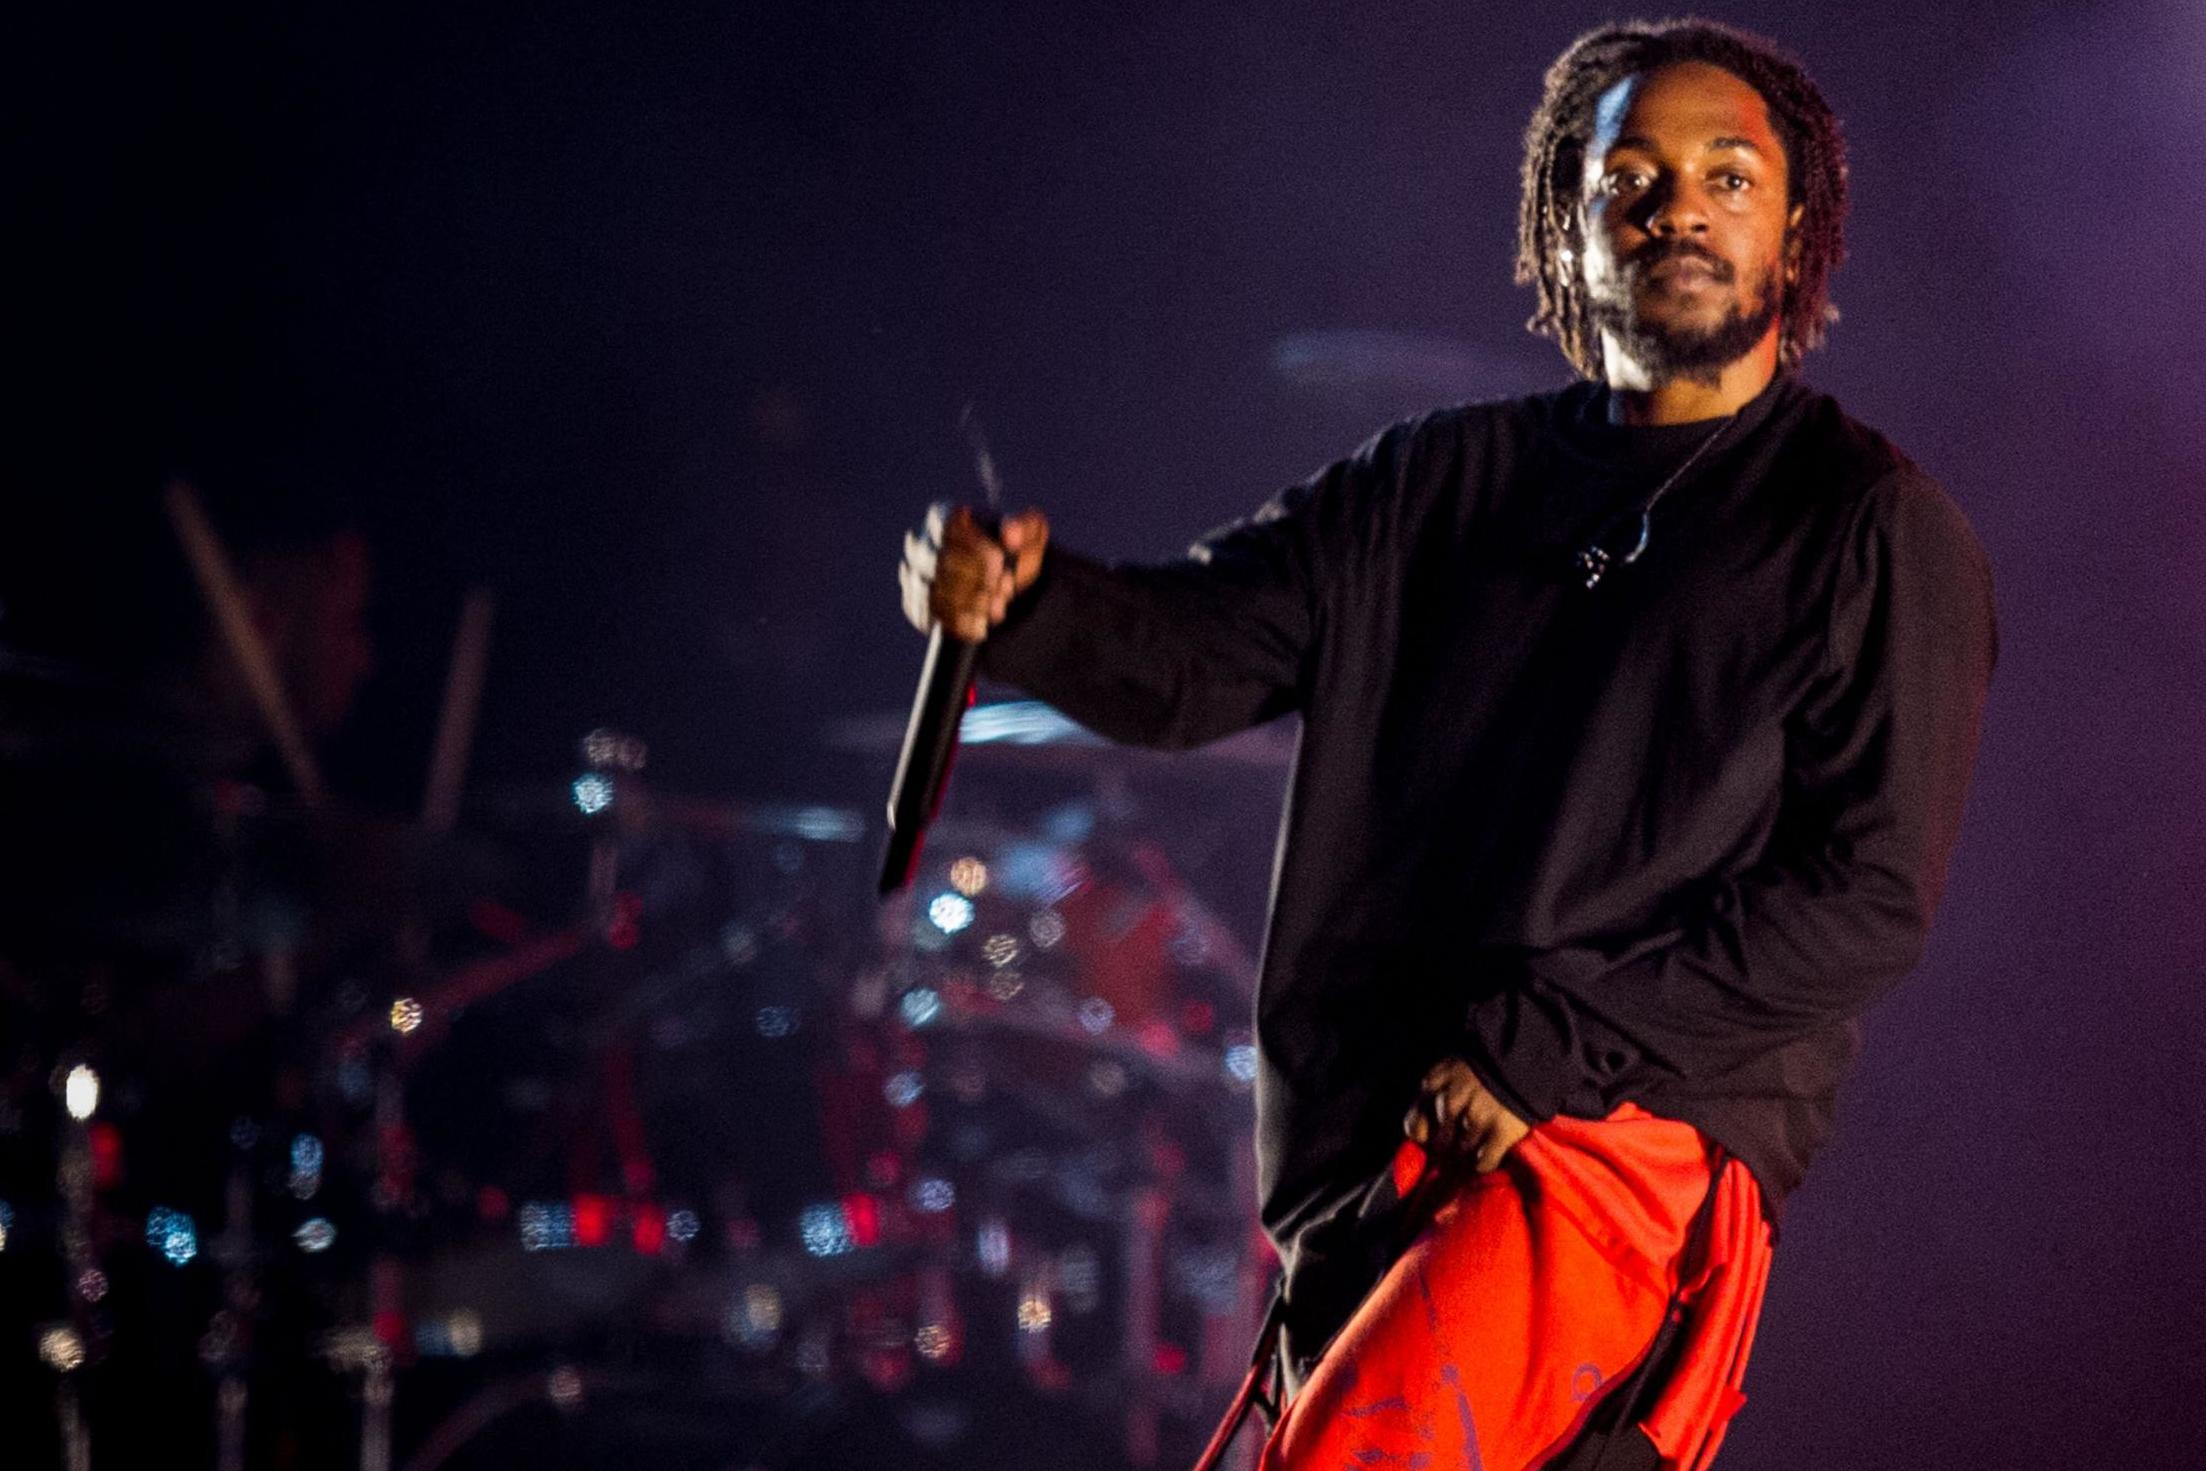 Kendrick Lamar performs during the third day of Lollapalooza Buenos Aires 2019 at Hipodromo de San Isidro on 31 March, 2019 in Buenos Aires, Argentina.